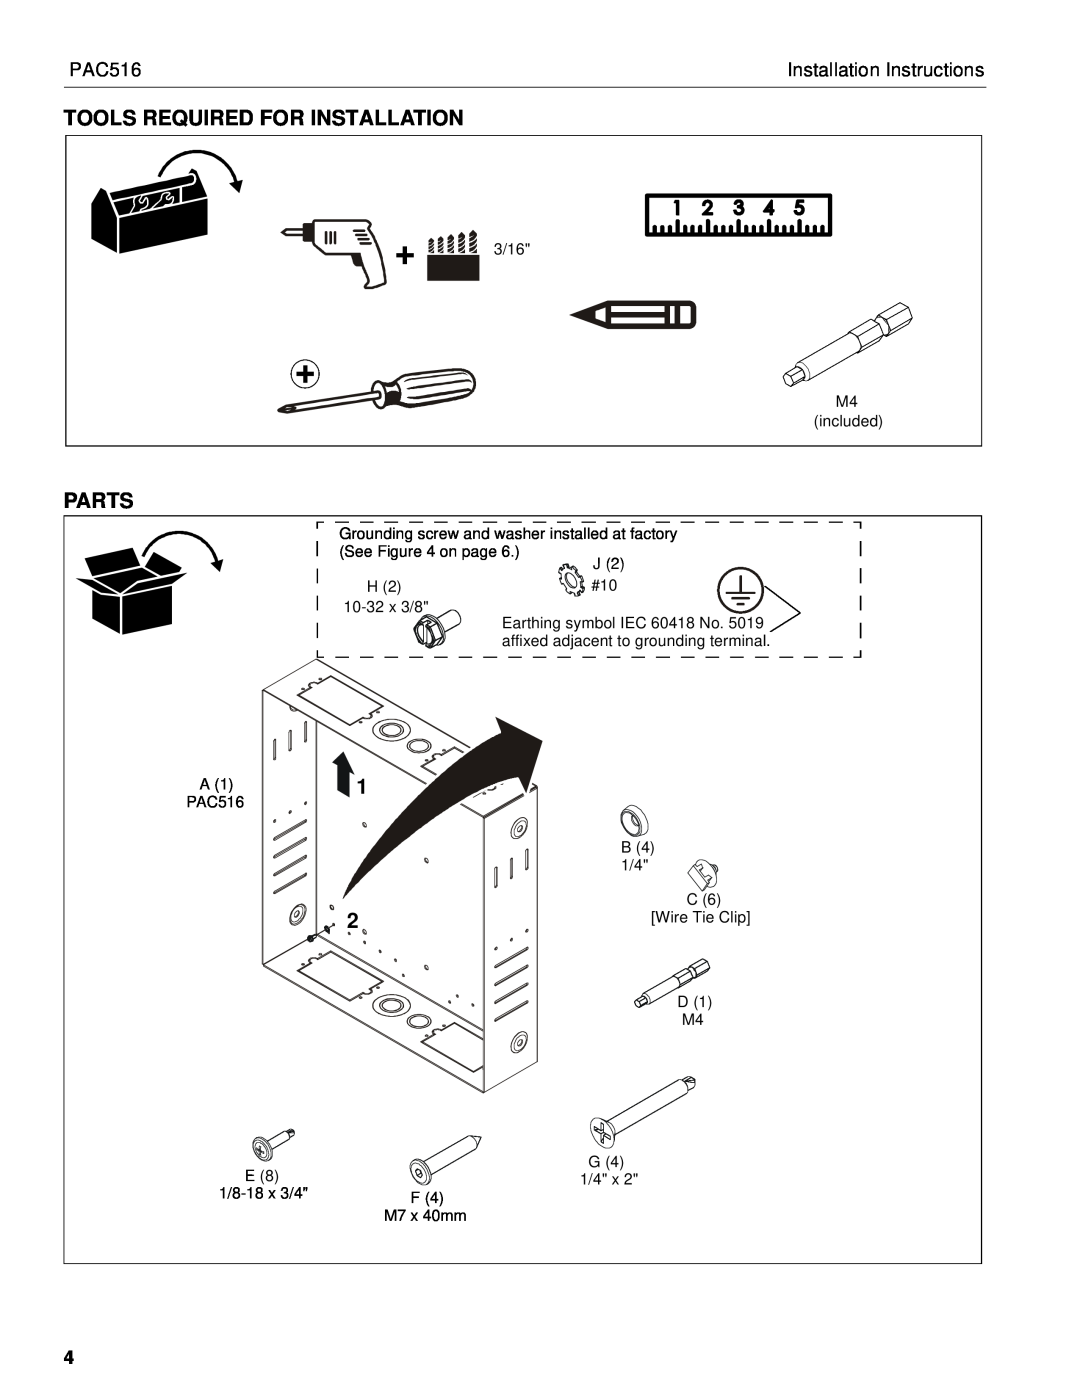 Chief Manufacturing PAC516 installation instructions Tools Required For Installation, Parts, Installation Instructions 